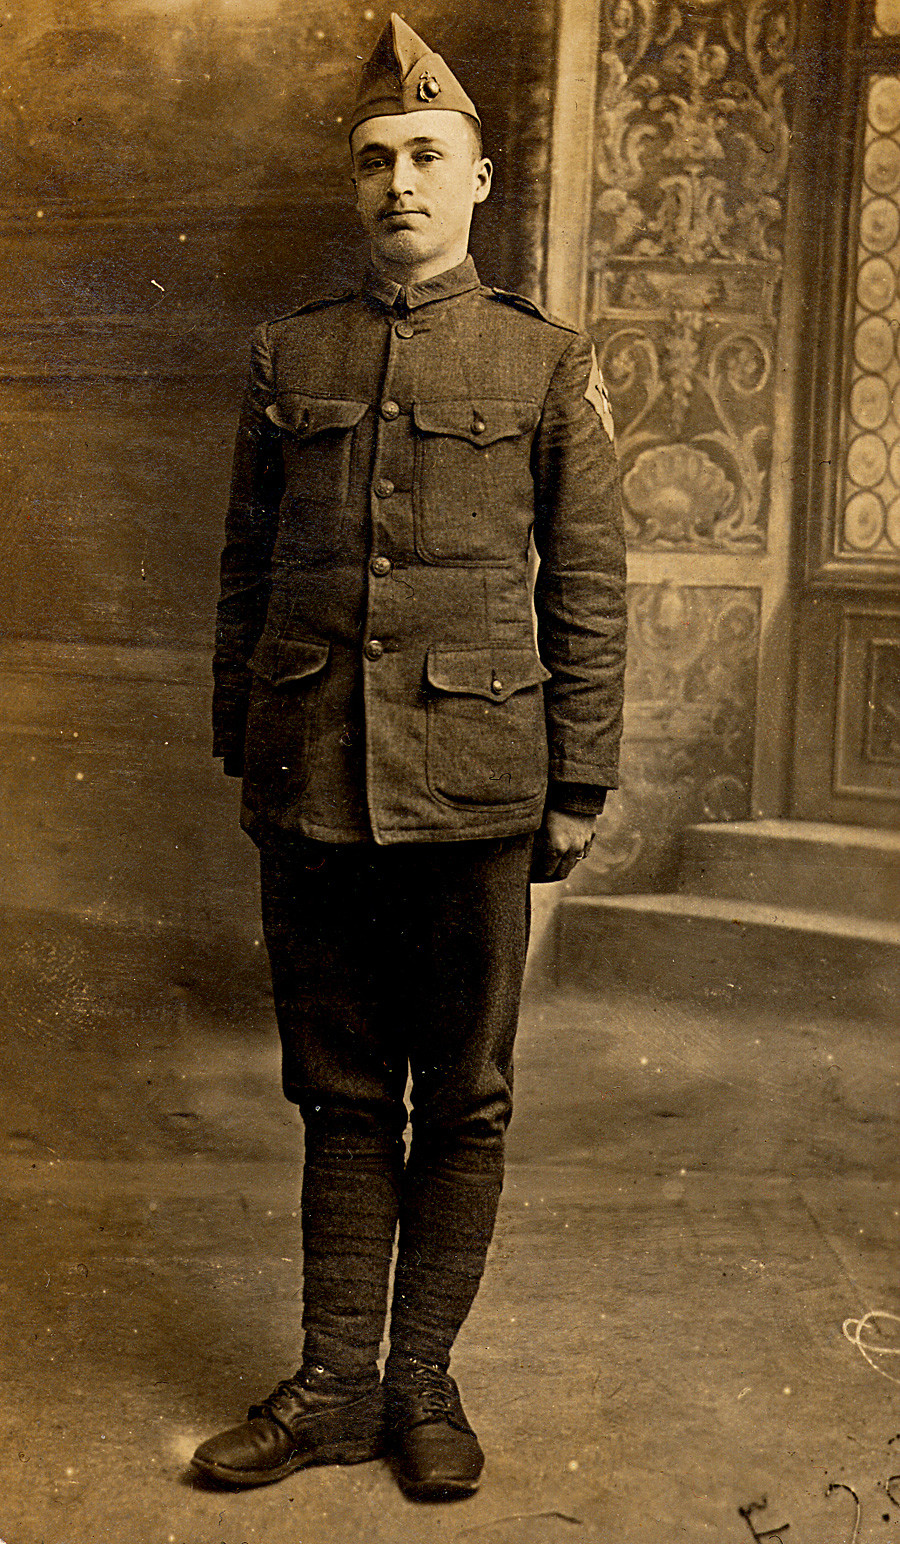 Brumfield's father in Aix-les-Bains, France, 1918